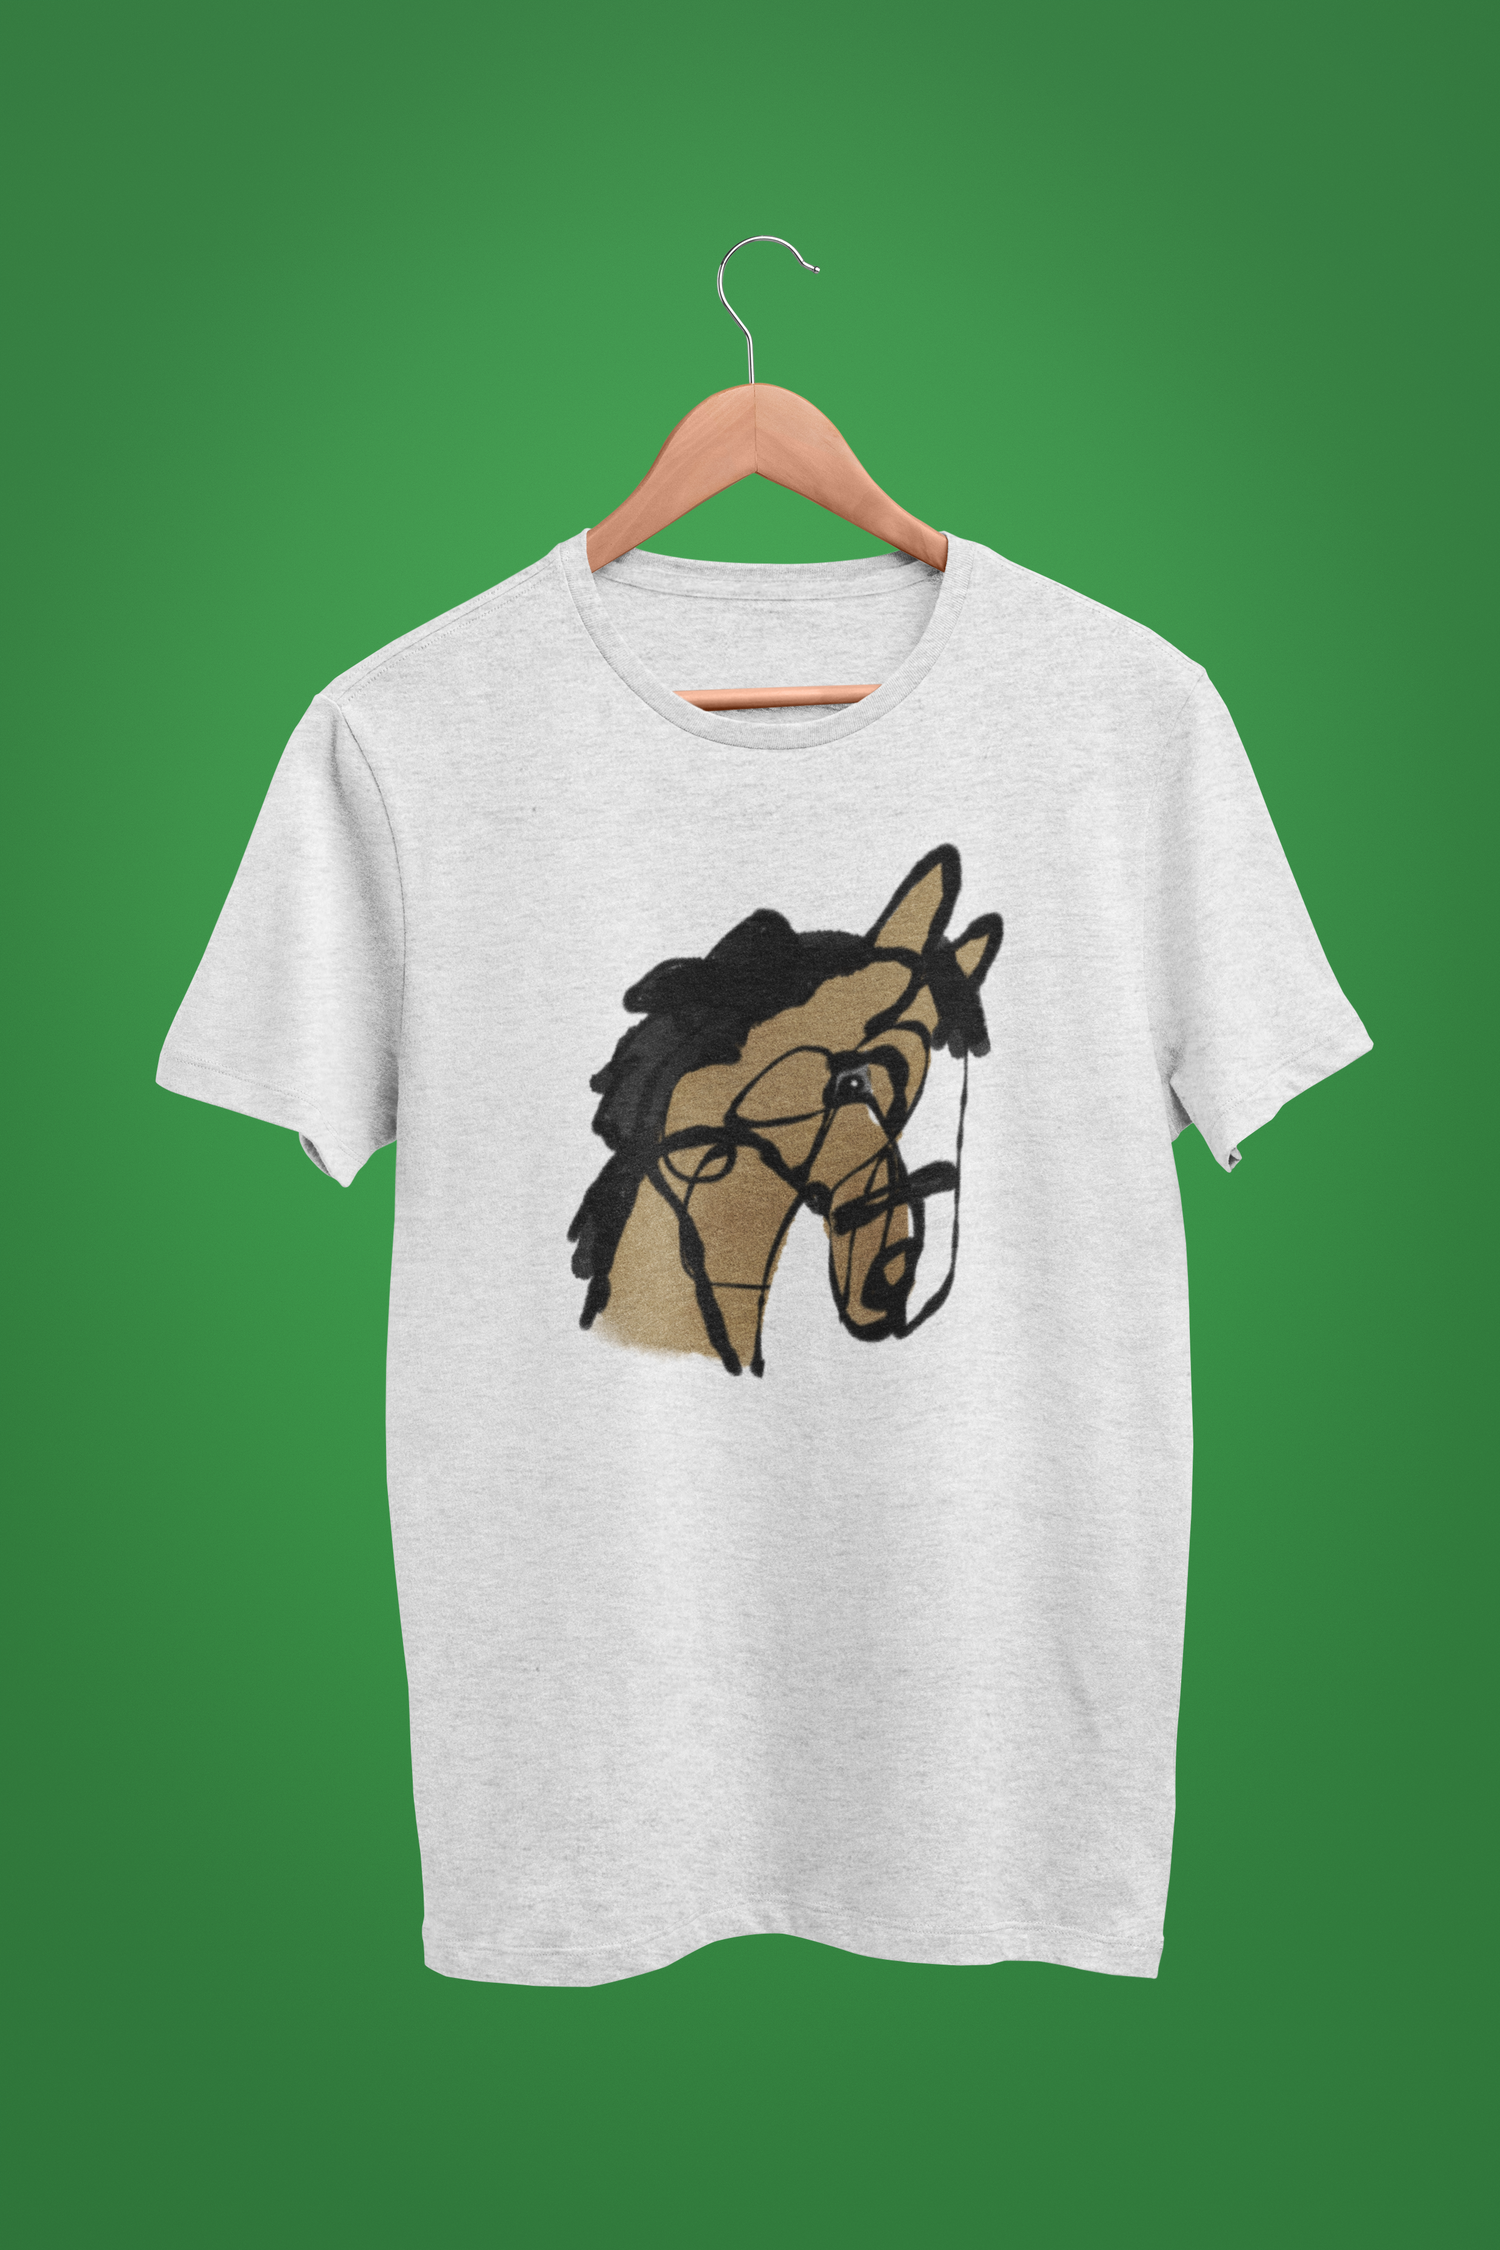 Horse T-shirt - I love my horse cute original design printed on a cream heather grey vegan cotton pony t-shirt by Hector and Bone